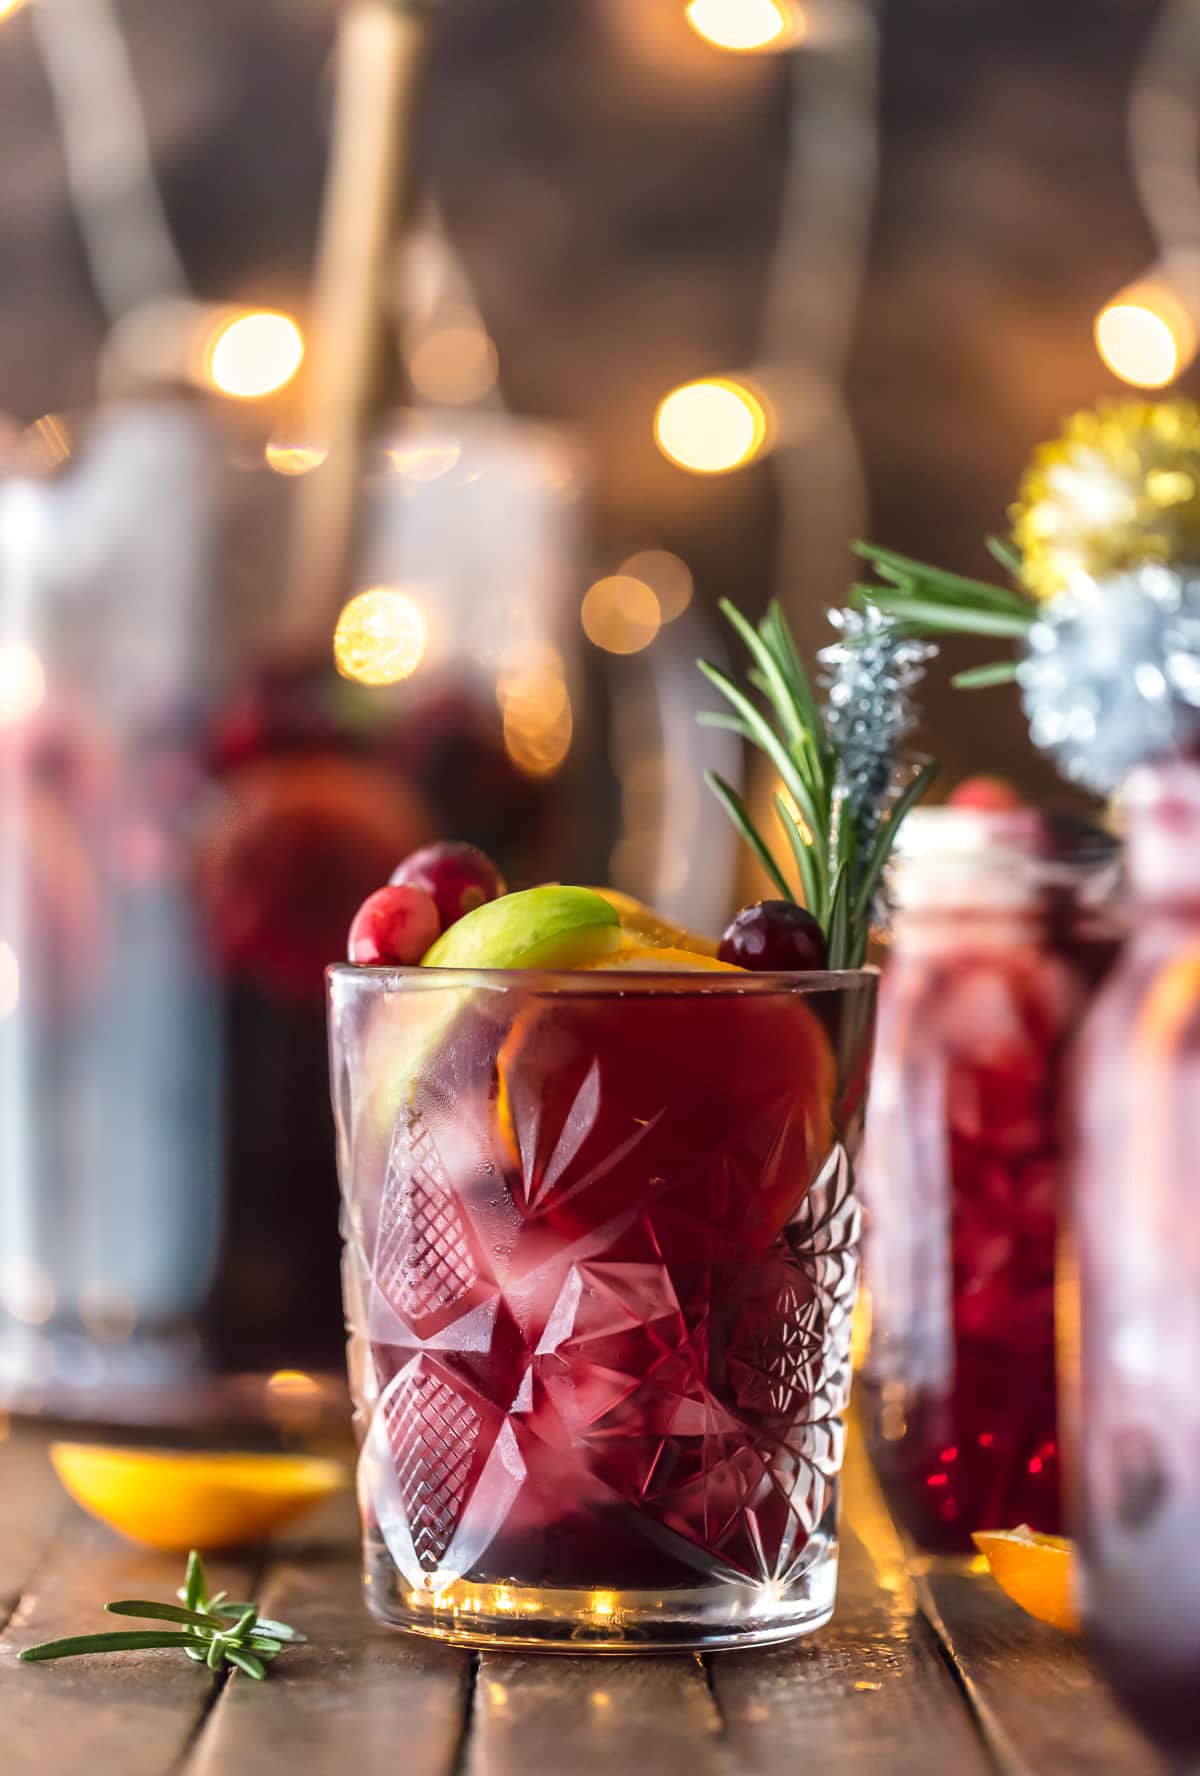 23 Heavenly Vegan Christmas Drinks and Cocktails | The ...